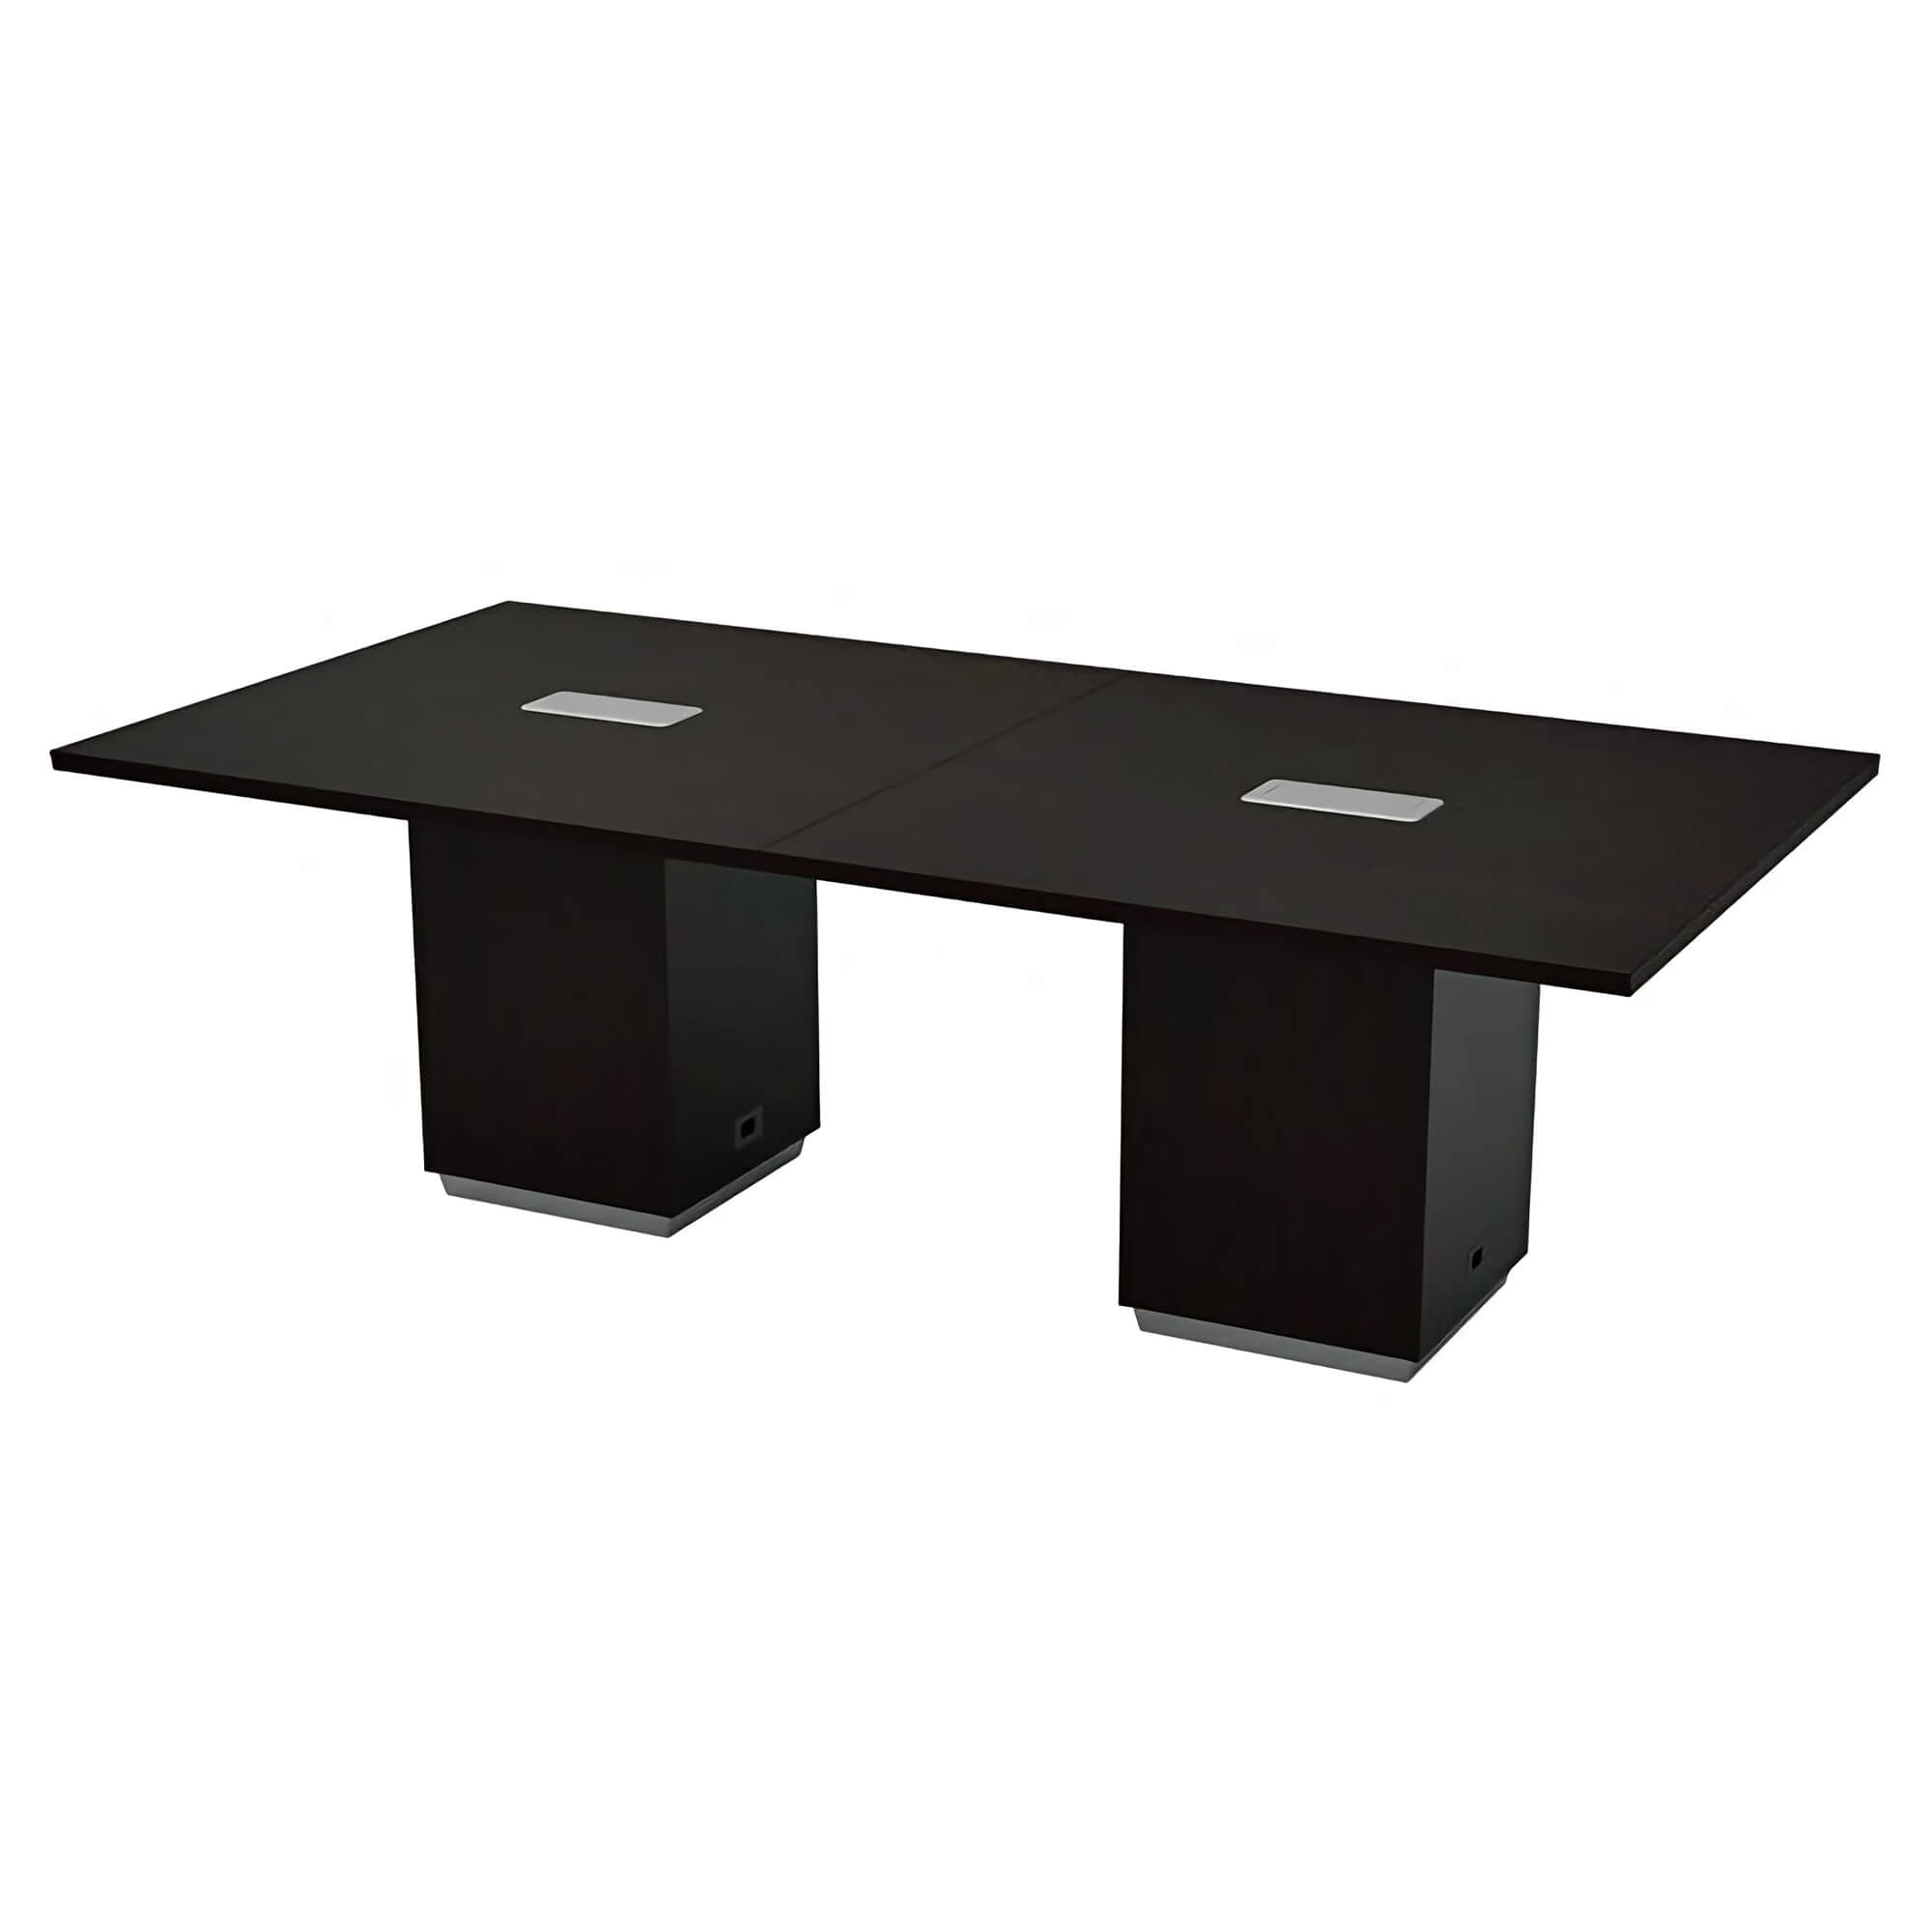 Conference tables CUB TUXDKR 60 PSO